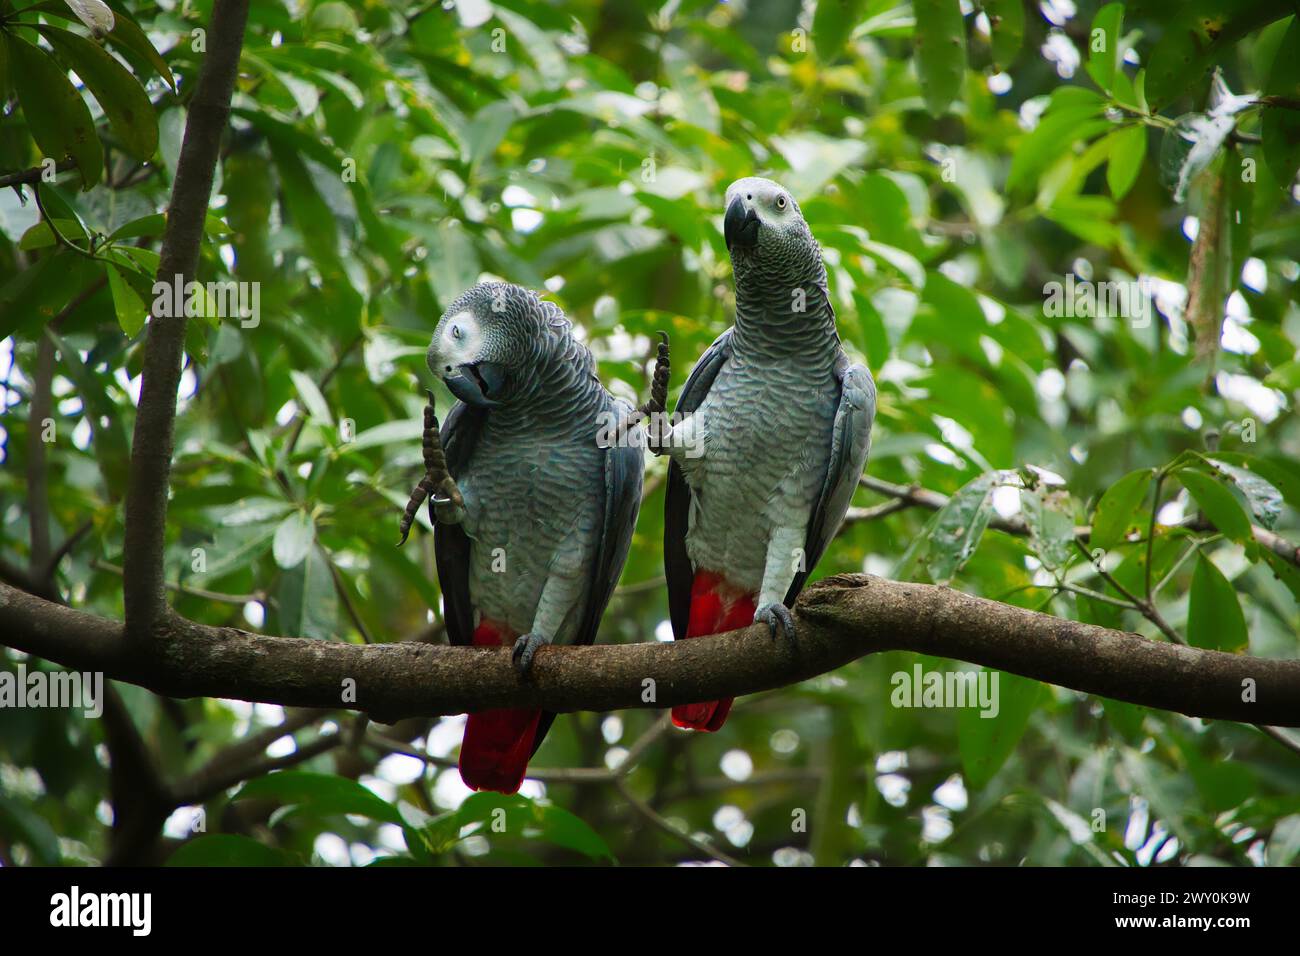 Two African Grey Parrots, also known as Congo Grey Parrot, perched on branch, scratching each other. Stock Photo